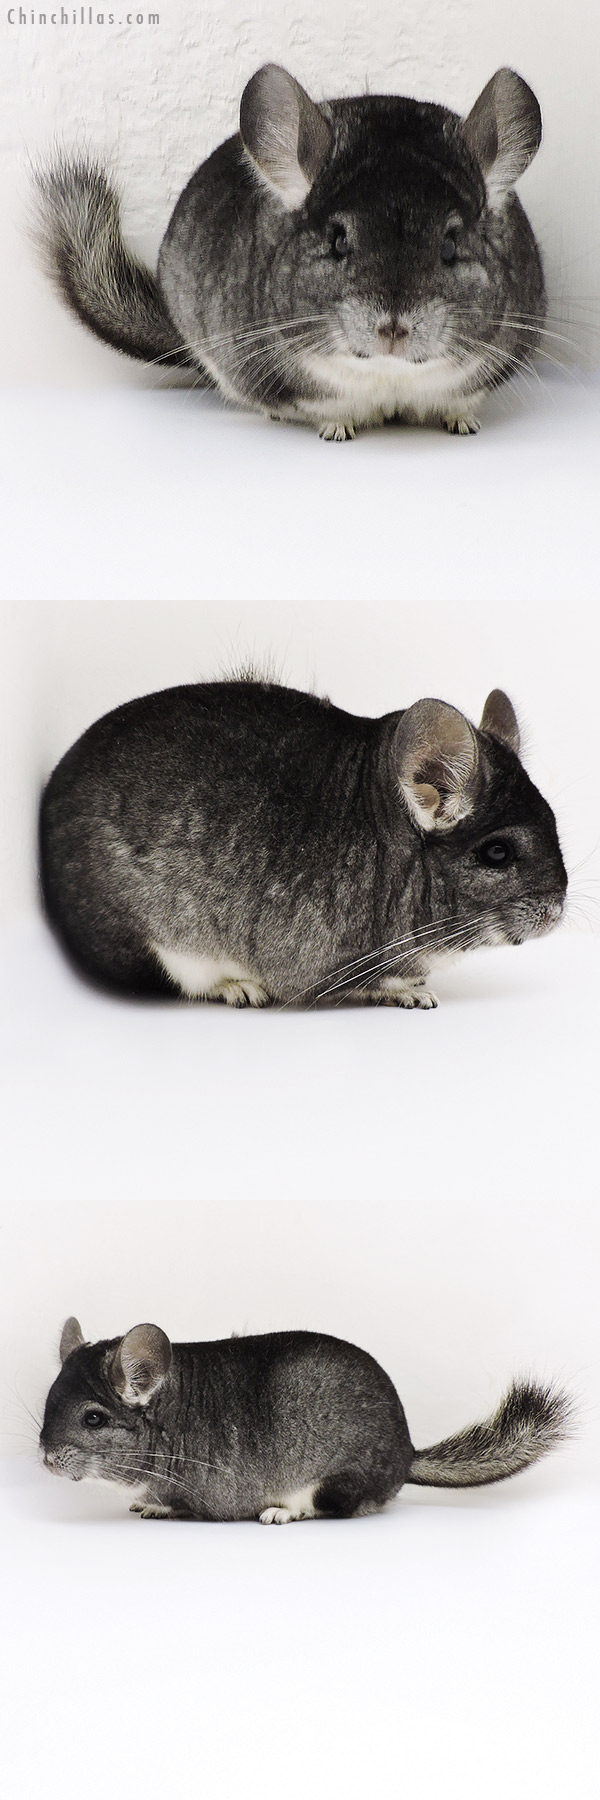 Chinchilla or related item offered for sale or export on Chinchillas.com - 18183 Blocky Premium Production Quality Standard Female Chinchilla